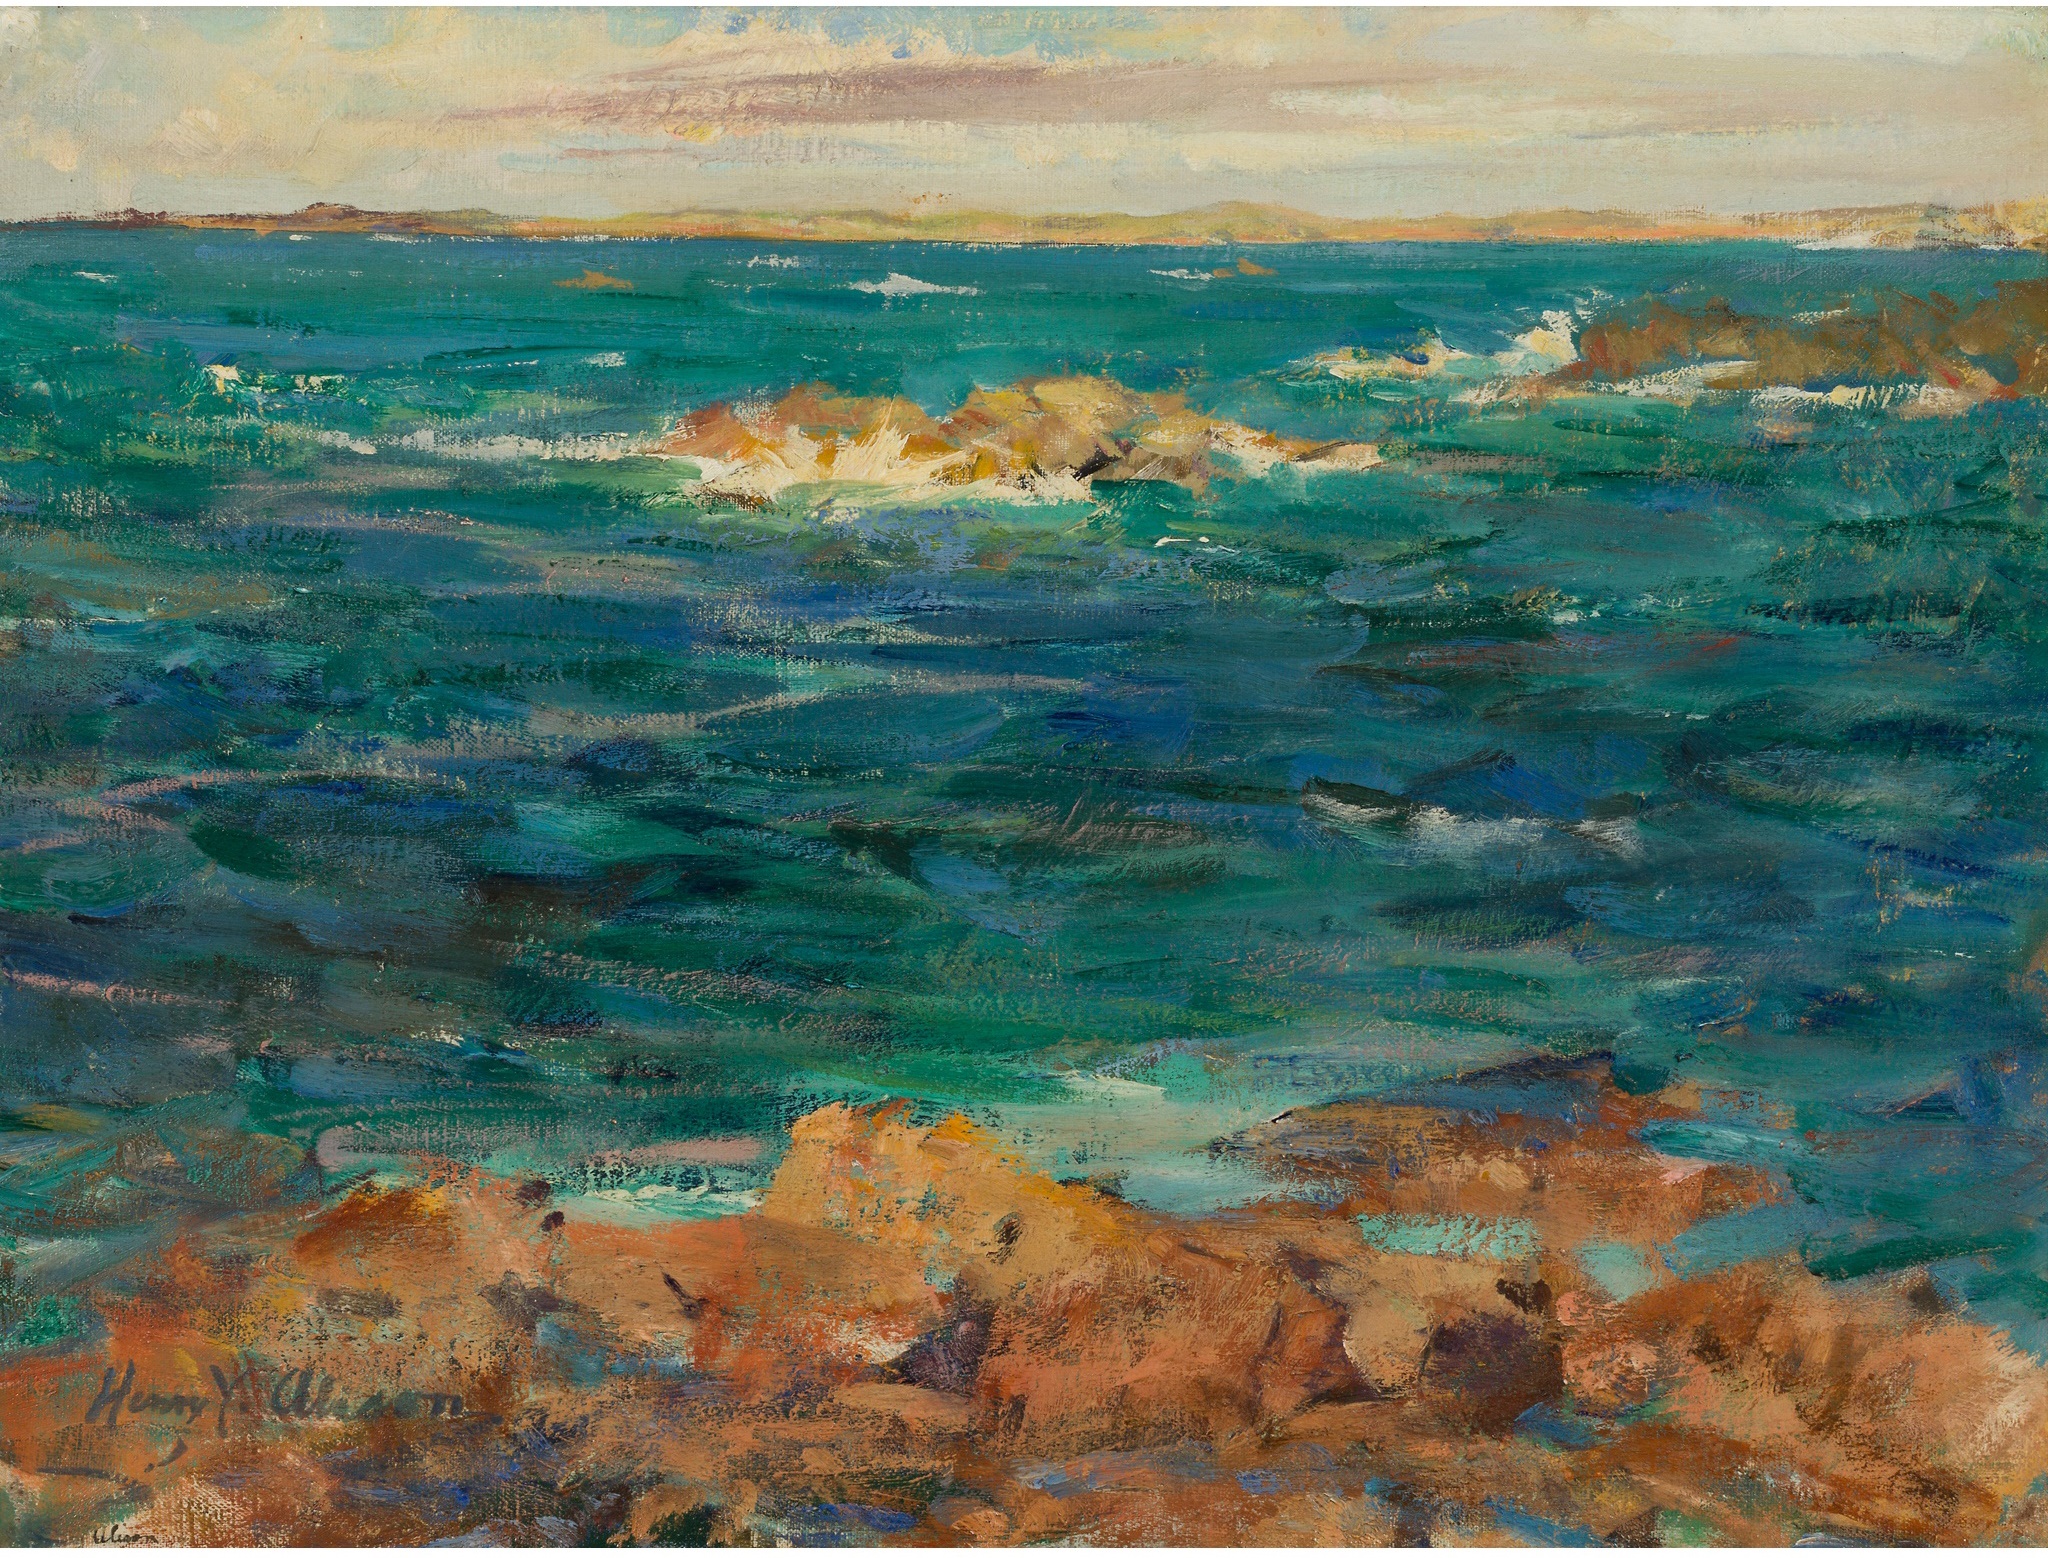 LOT 39 | § HENRY YOUNG ALISON (SCOTTISH 1889-1972) | SEASCAPE | £300 - £500 + fees